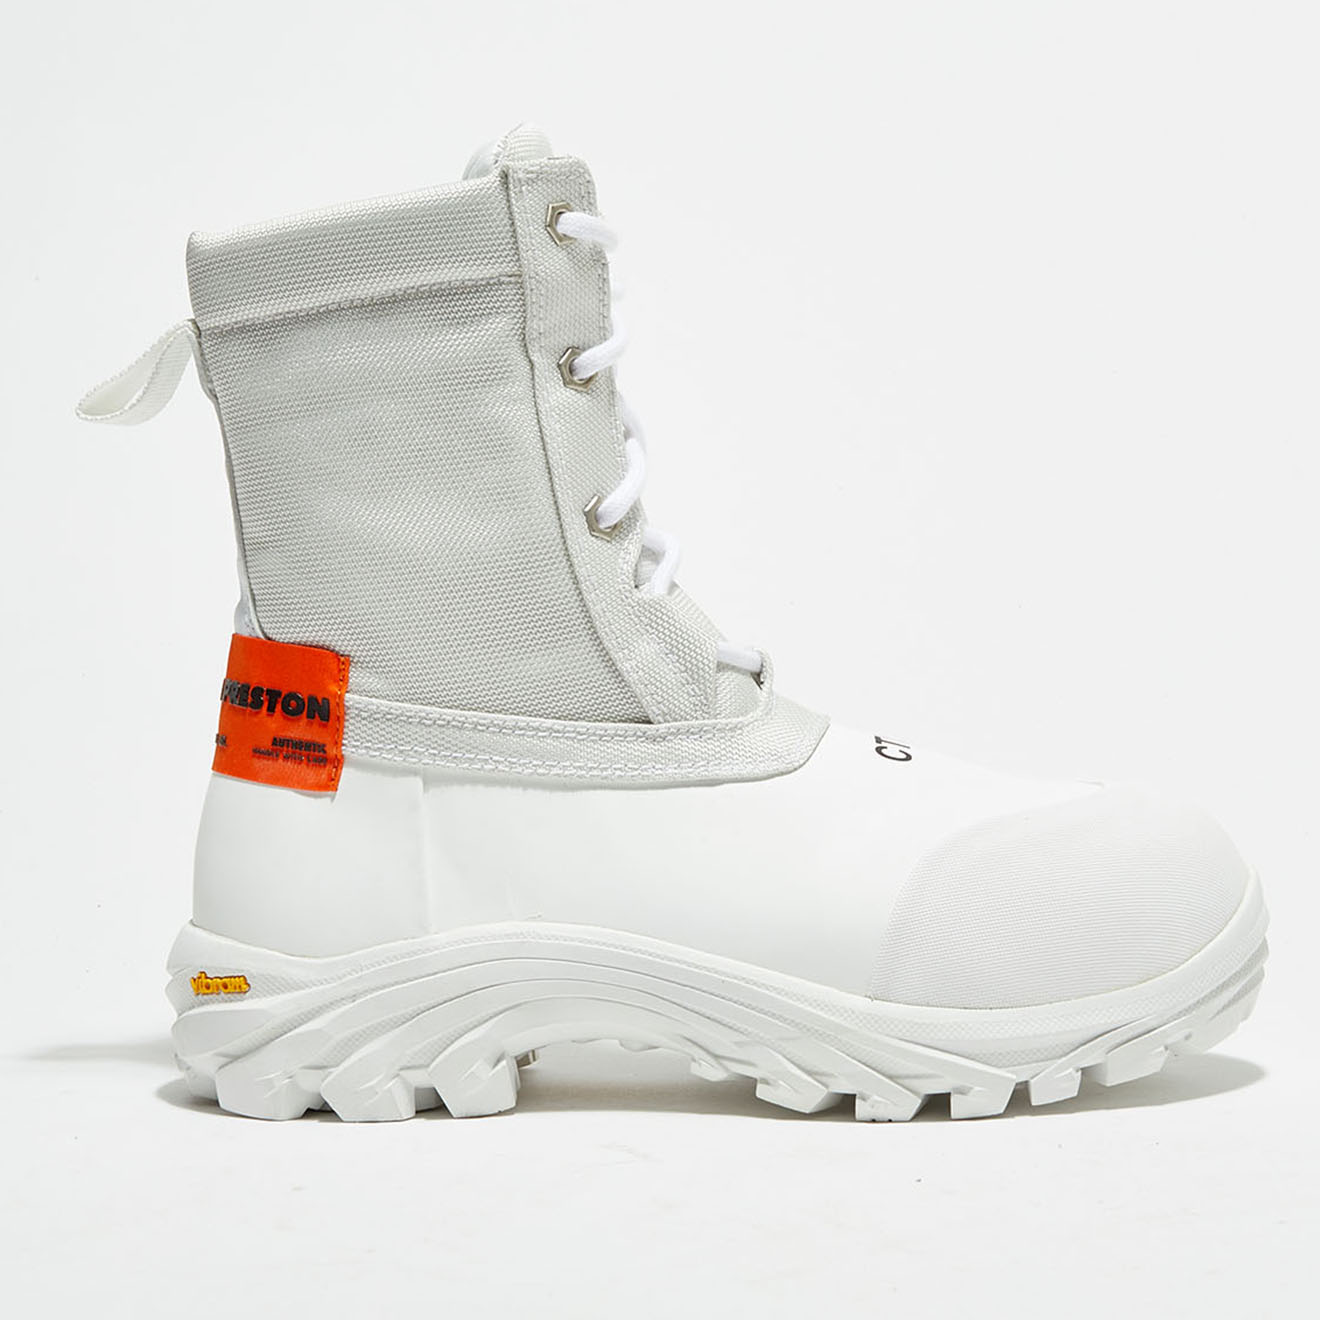 heron preston - boots security blanches